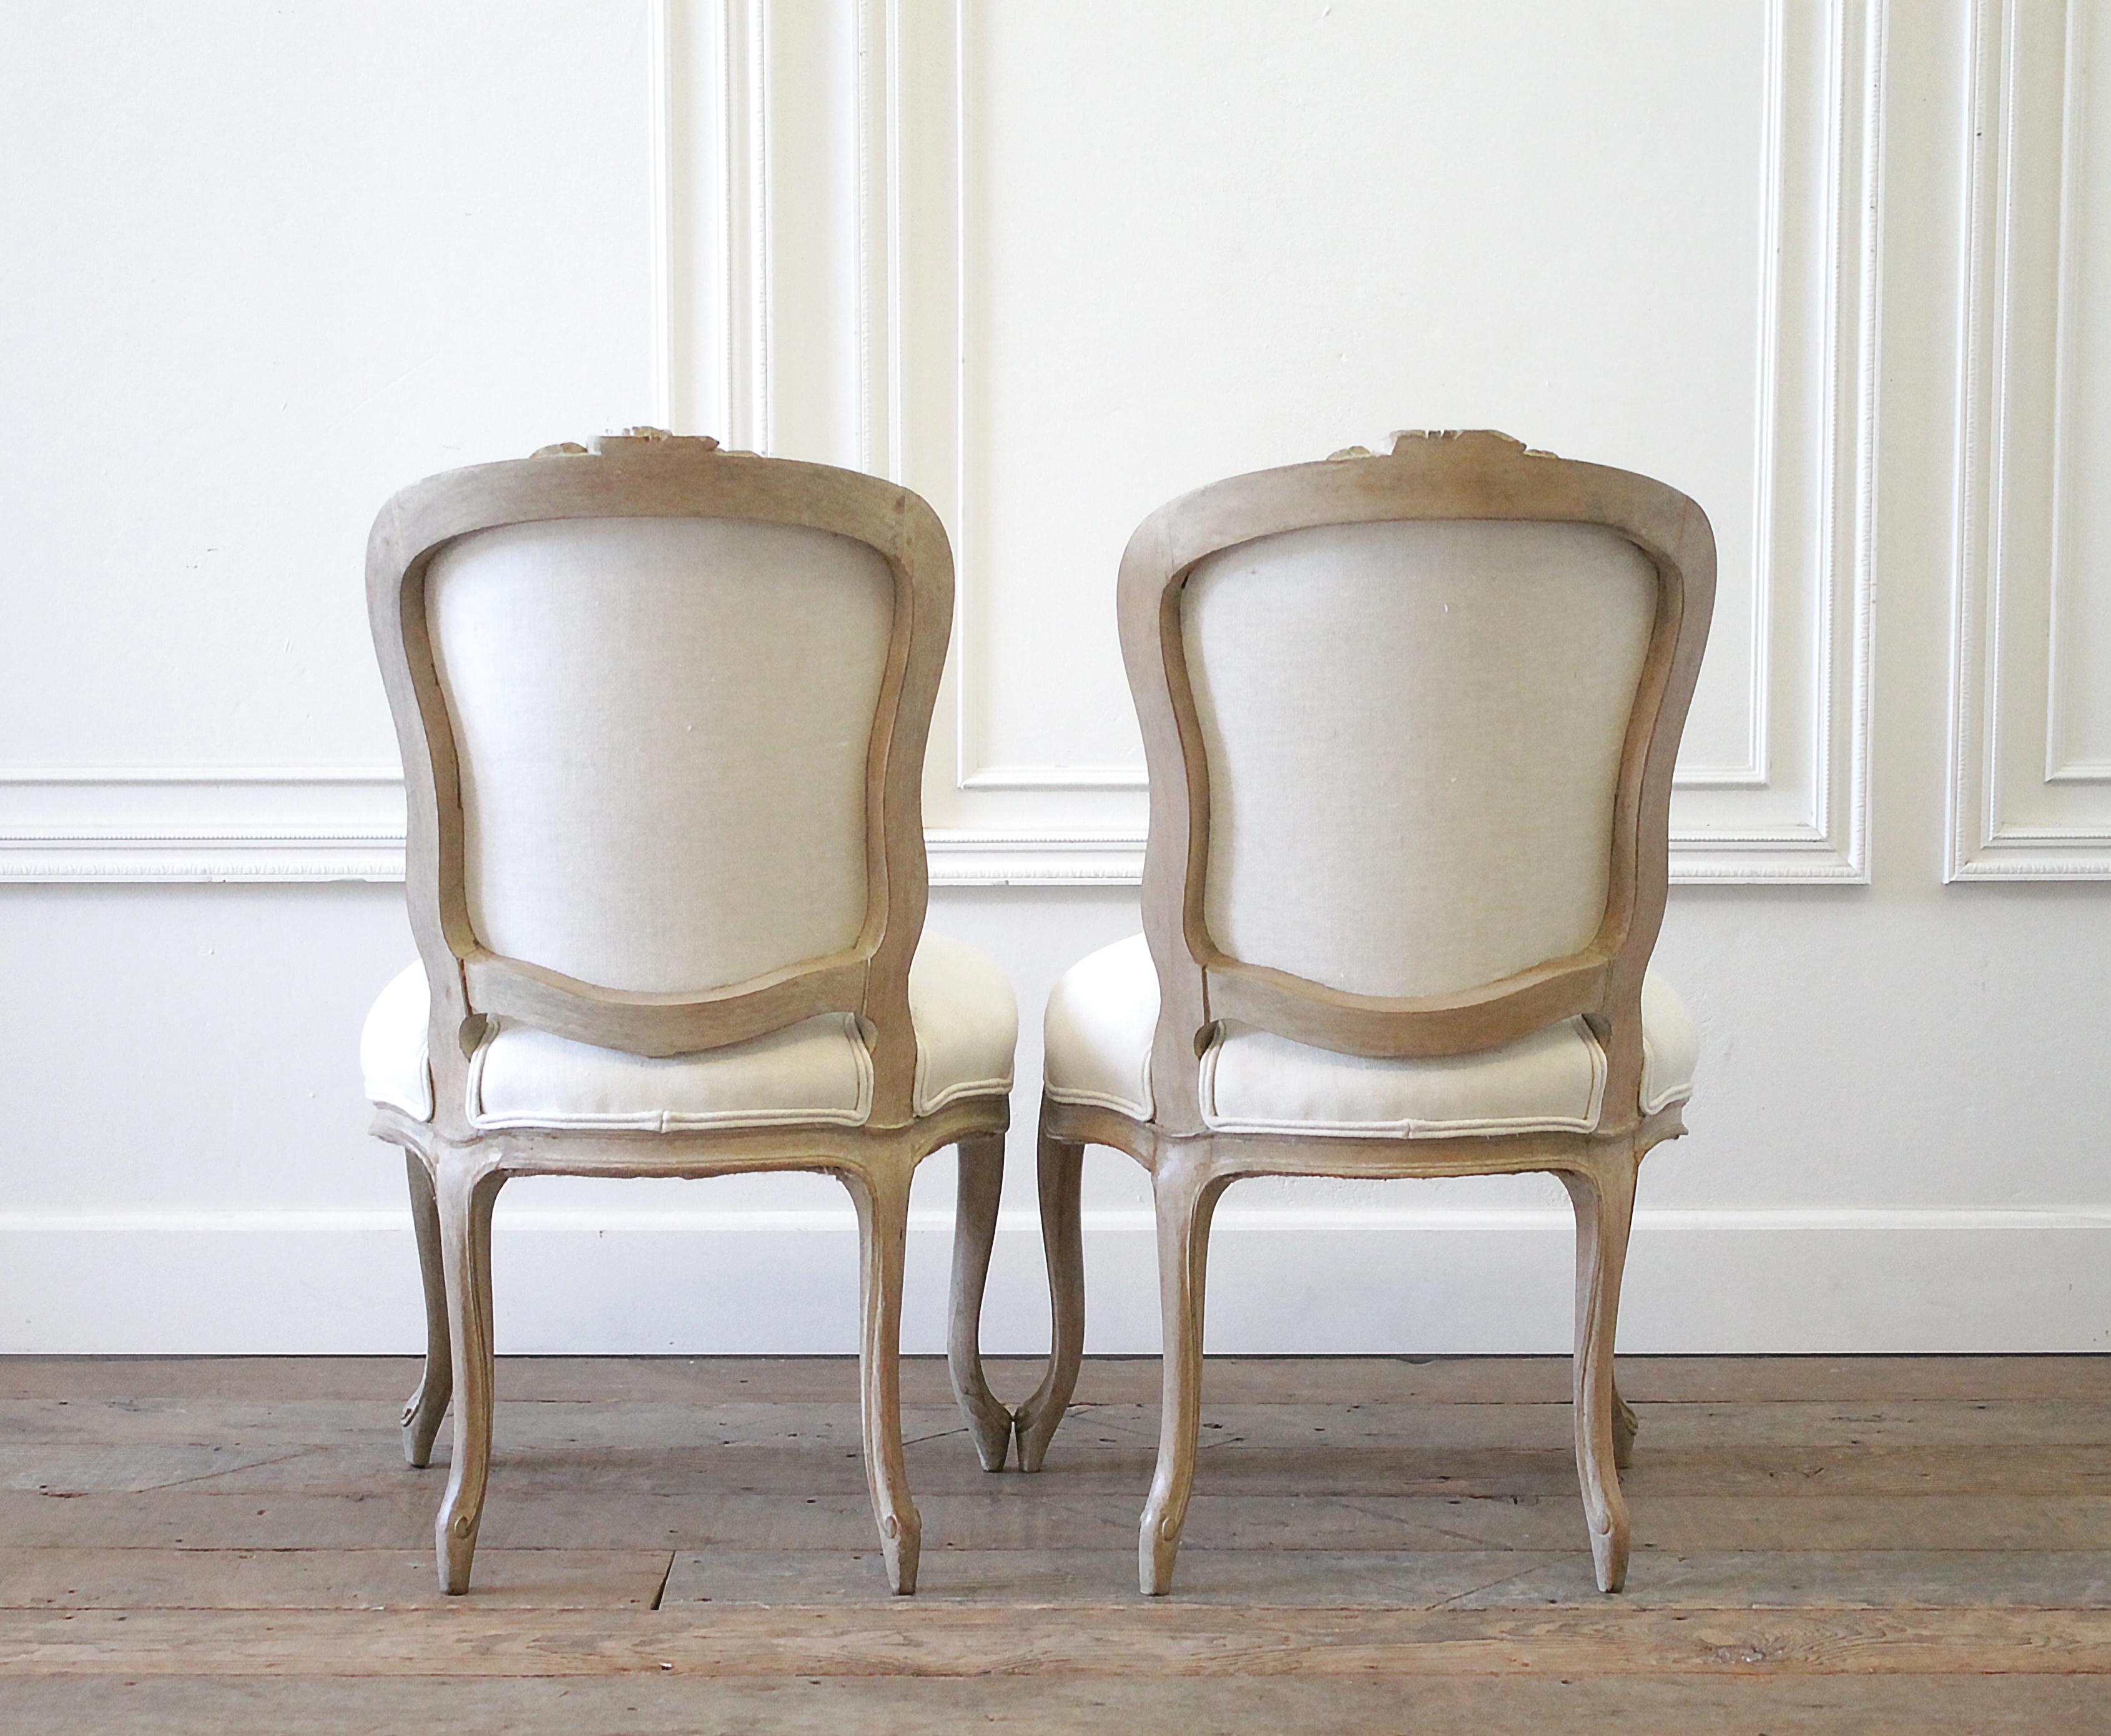 European 20th Century Louis XV Style Carved Wood and Linen Upholstered Chairs